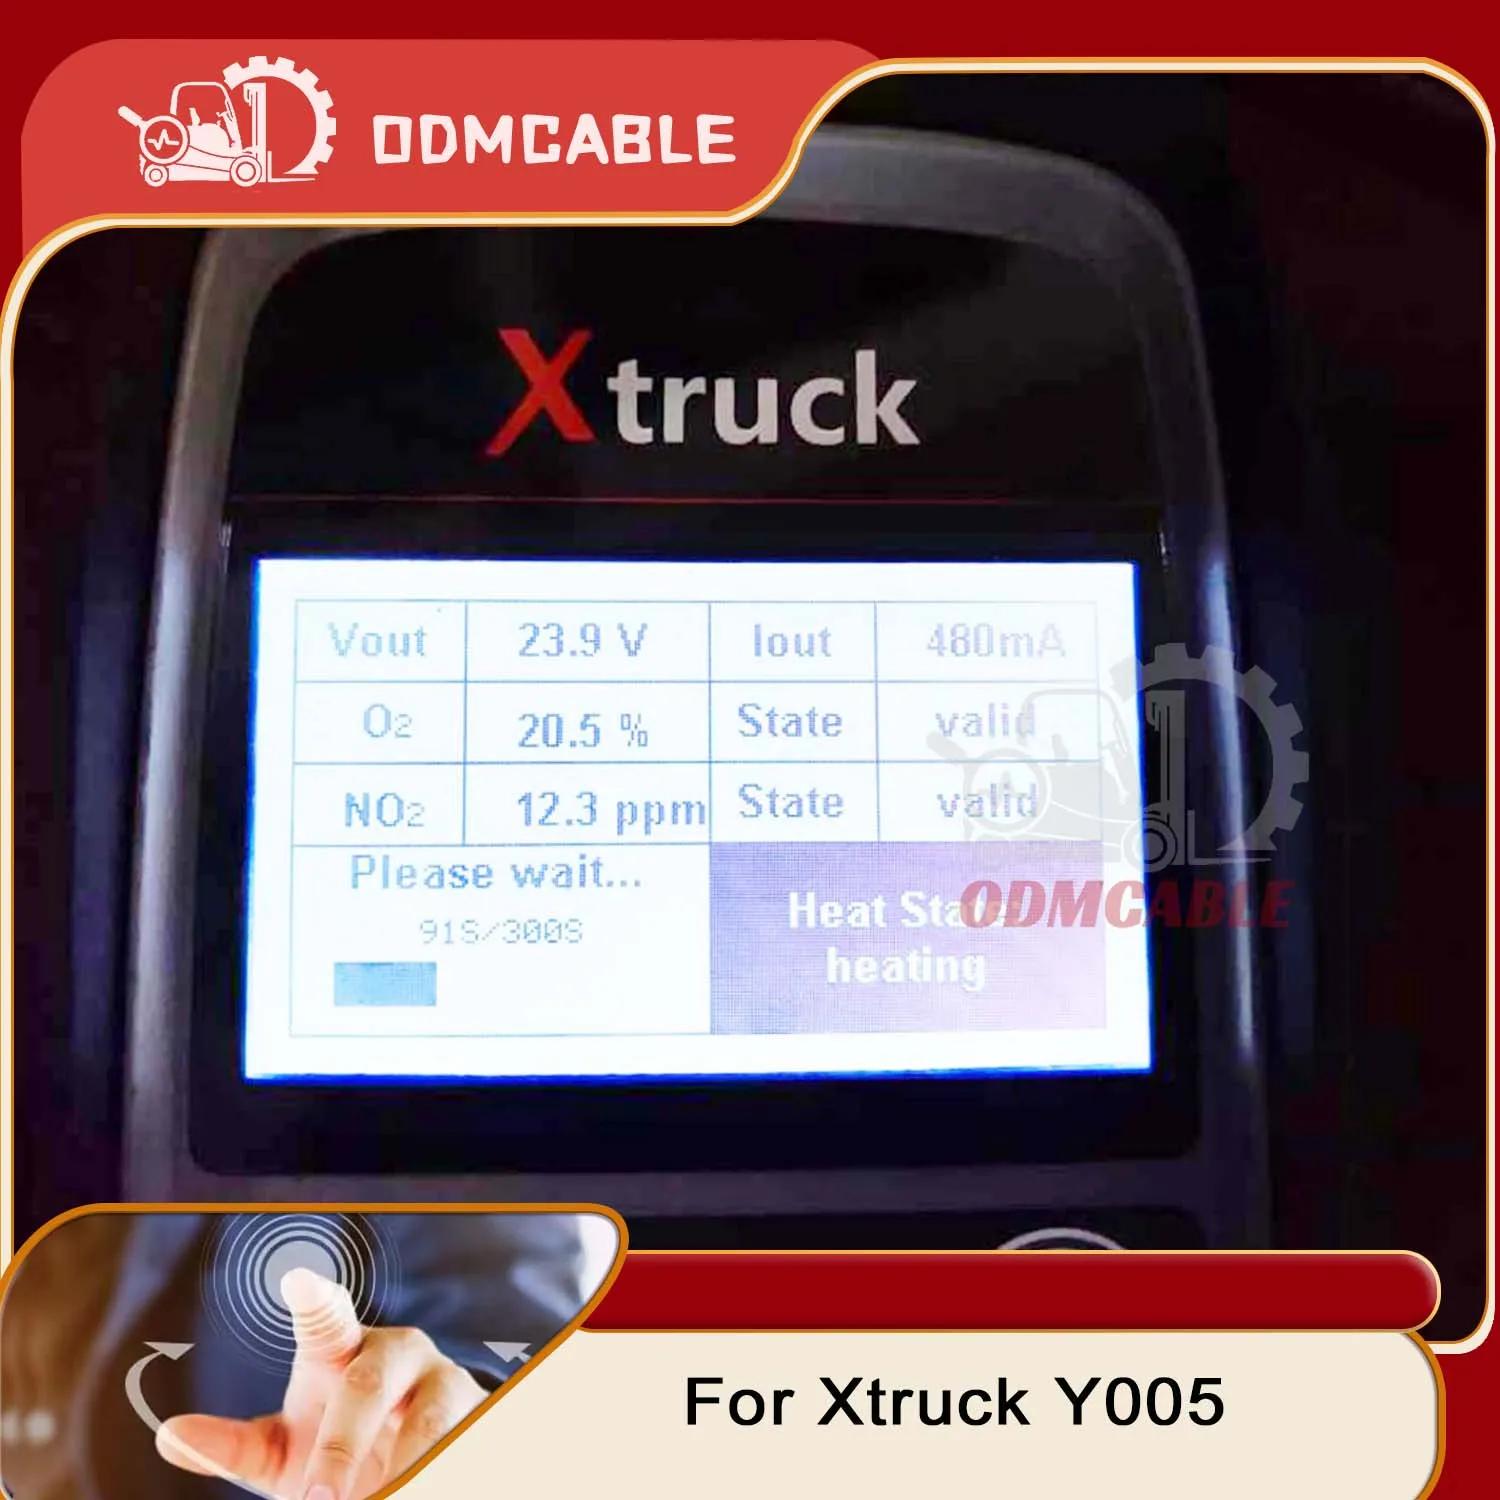 ODMcable  ڵ xtruck y005    콺  ׽,   ׽Ʈ   